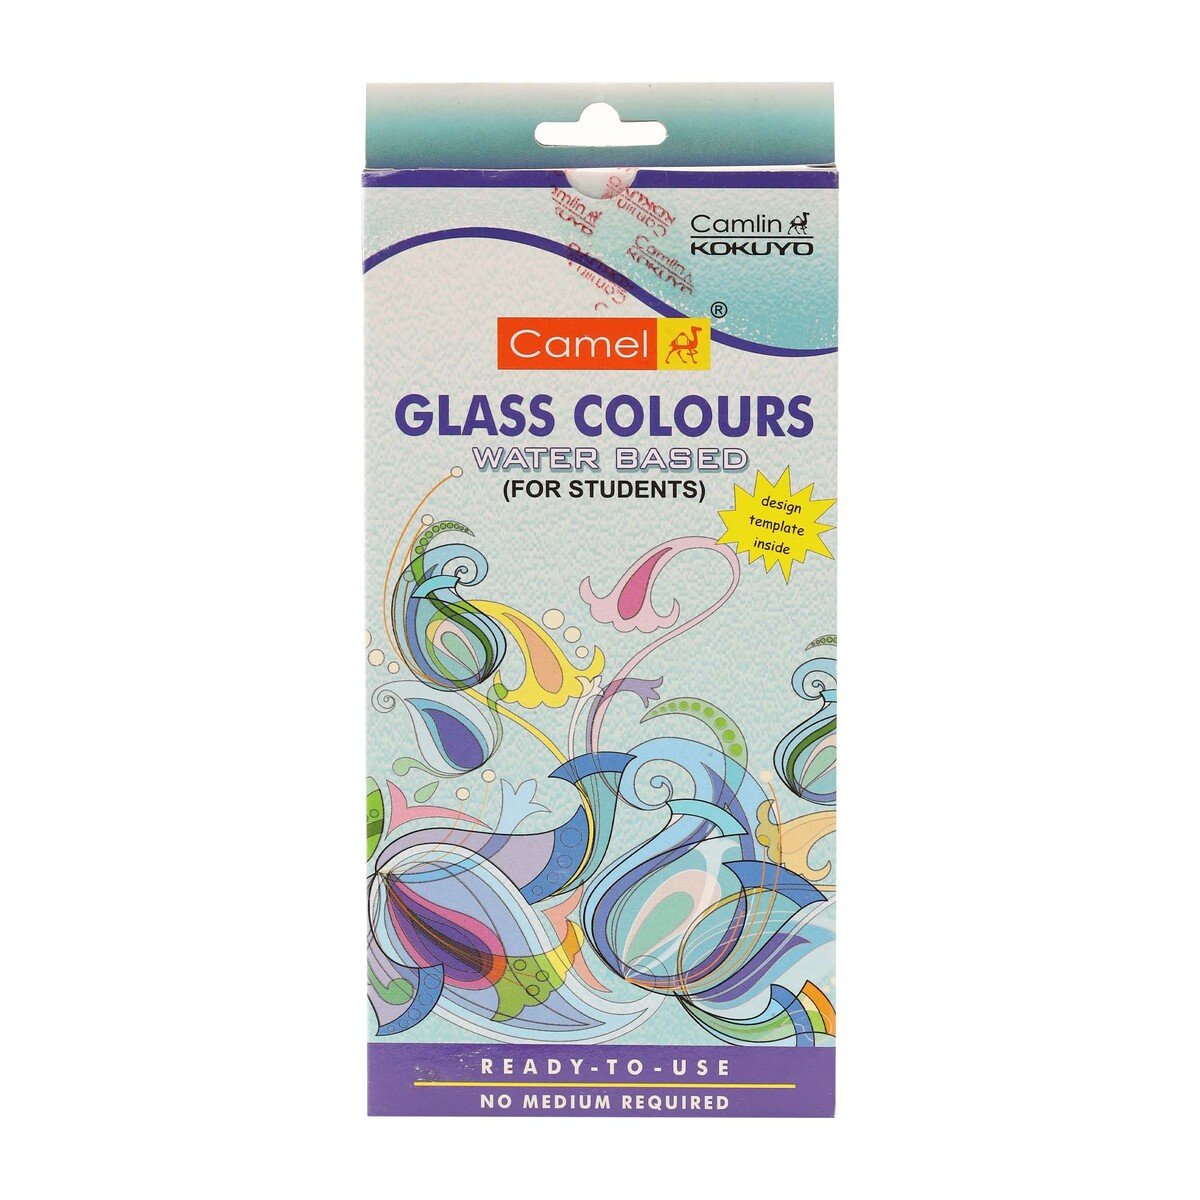 Camel Glass Colours Water based 10mlx6 Shades